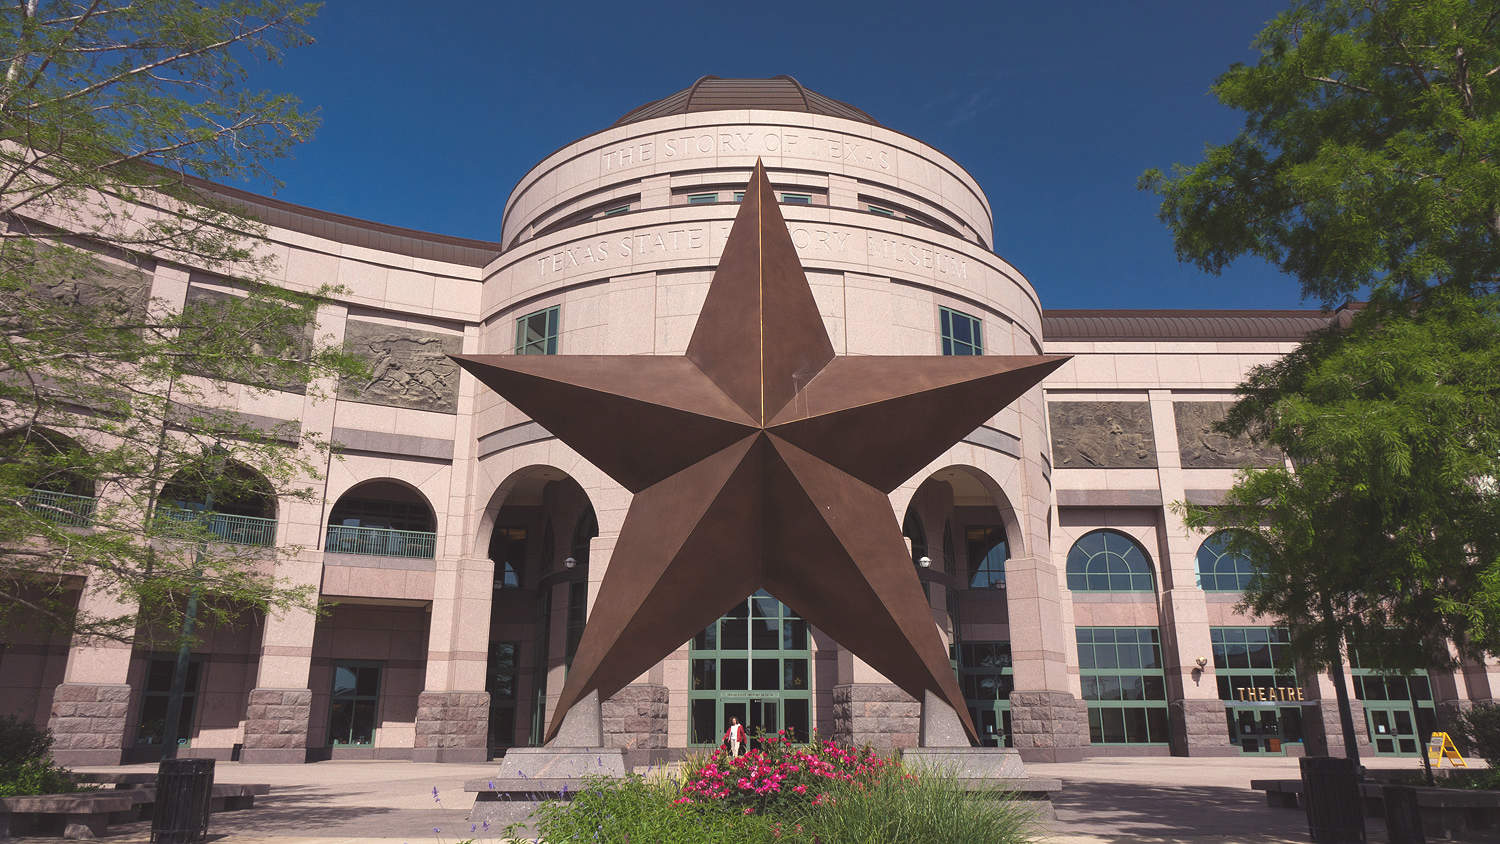 Visit the Bullock Texas State History Museum